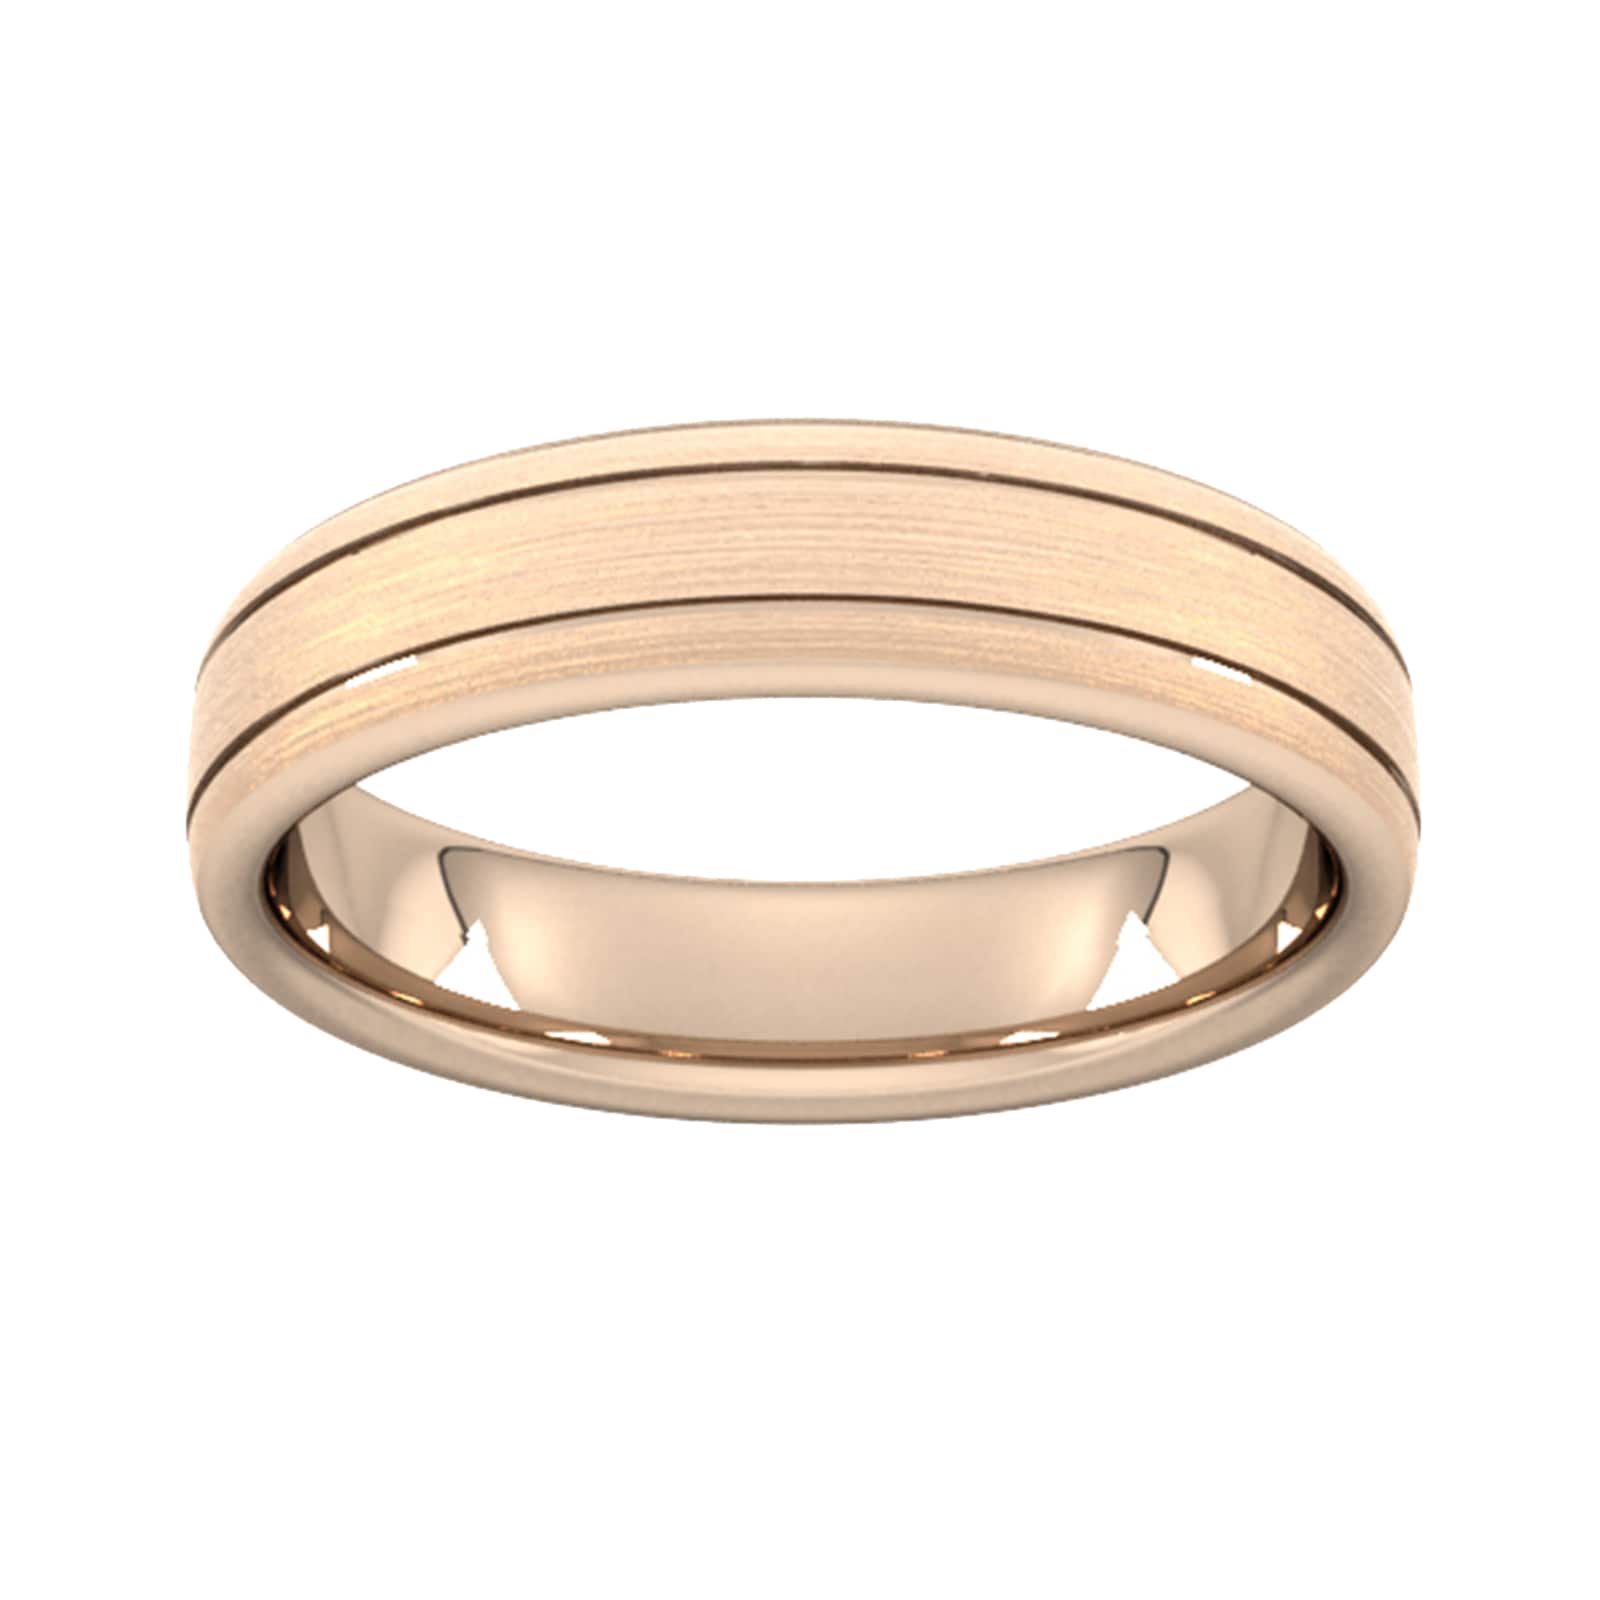 5mm Traditional Court Heavy Matt Finish With Double Grooves Wedding Ring In 18 Carat Rose Gold - Ring Size O